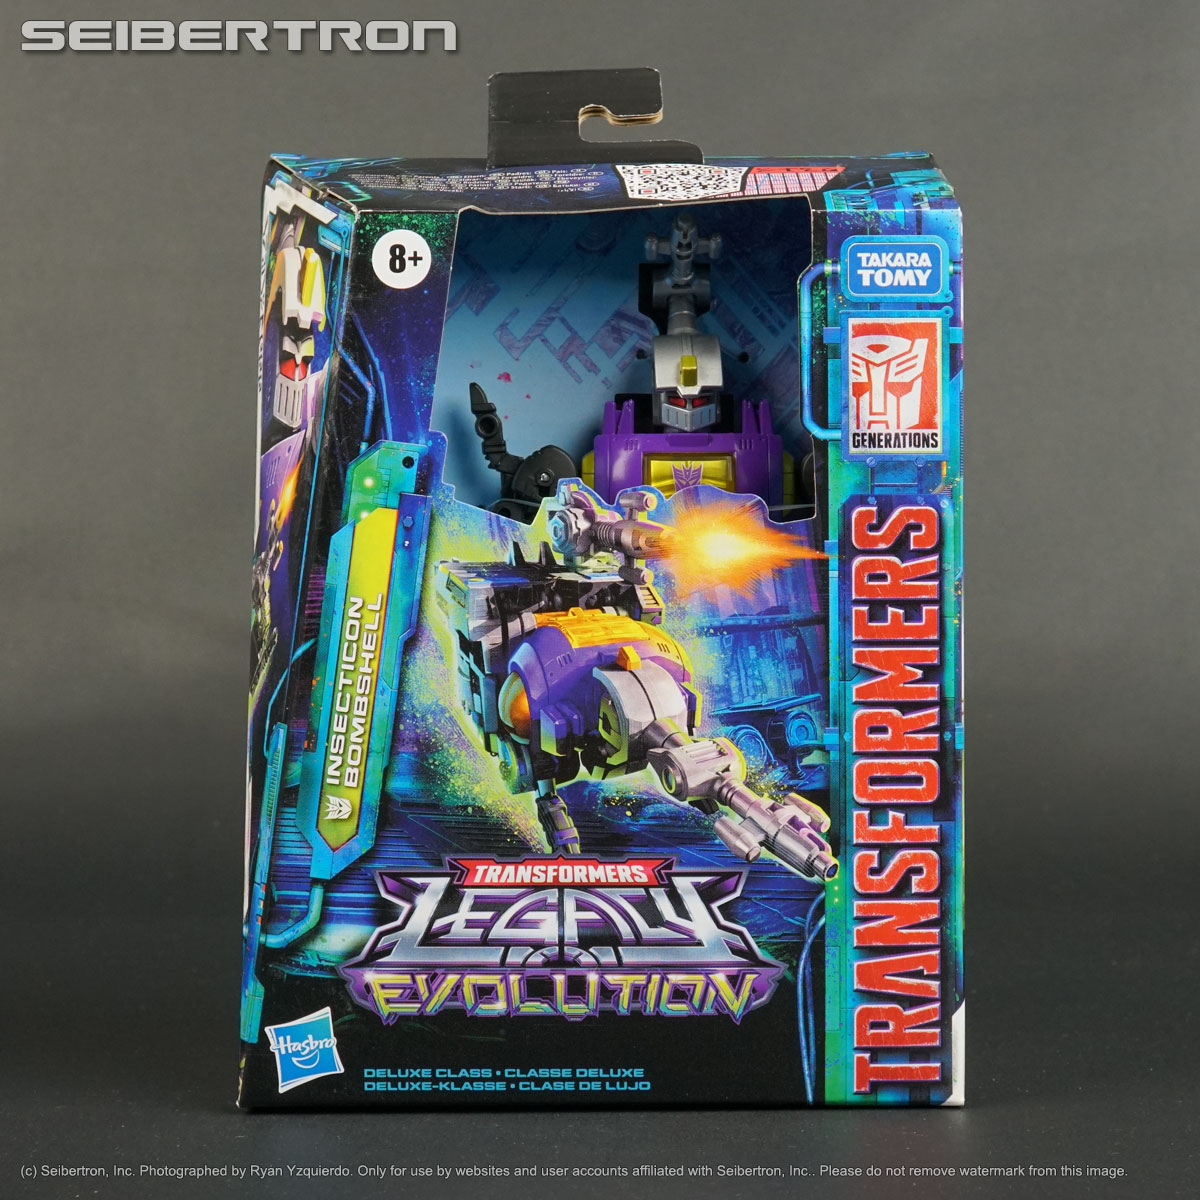 BOMBSHELL Transformers Legacy Evolution Deluxe Insecticon Hasbro 2023 New